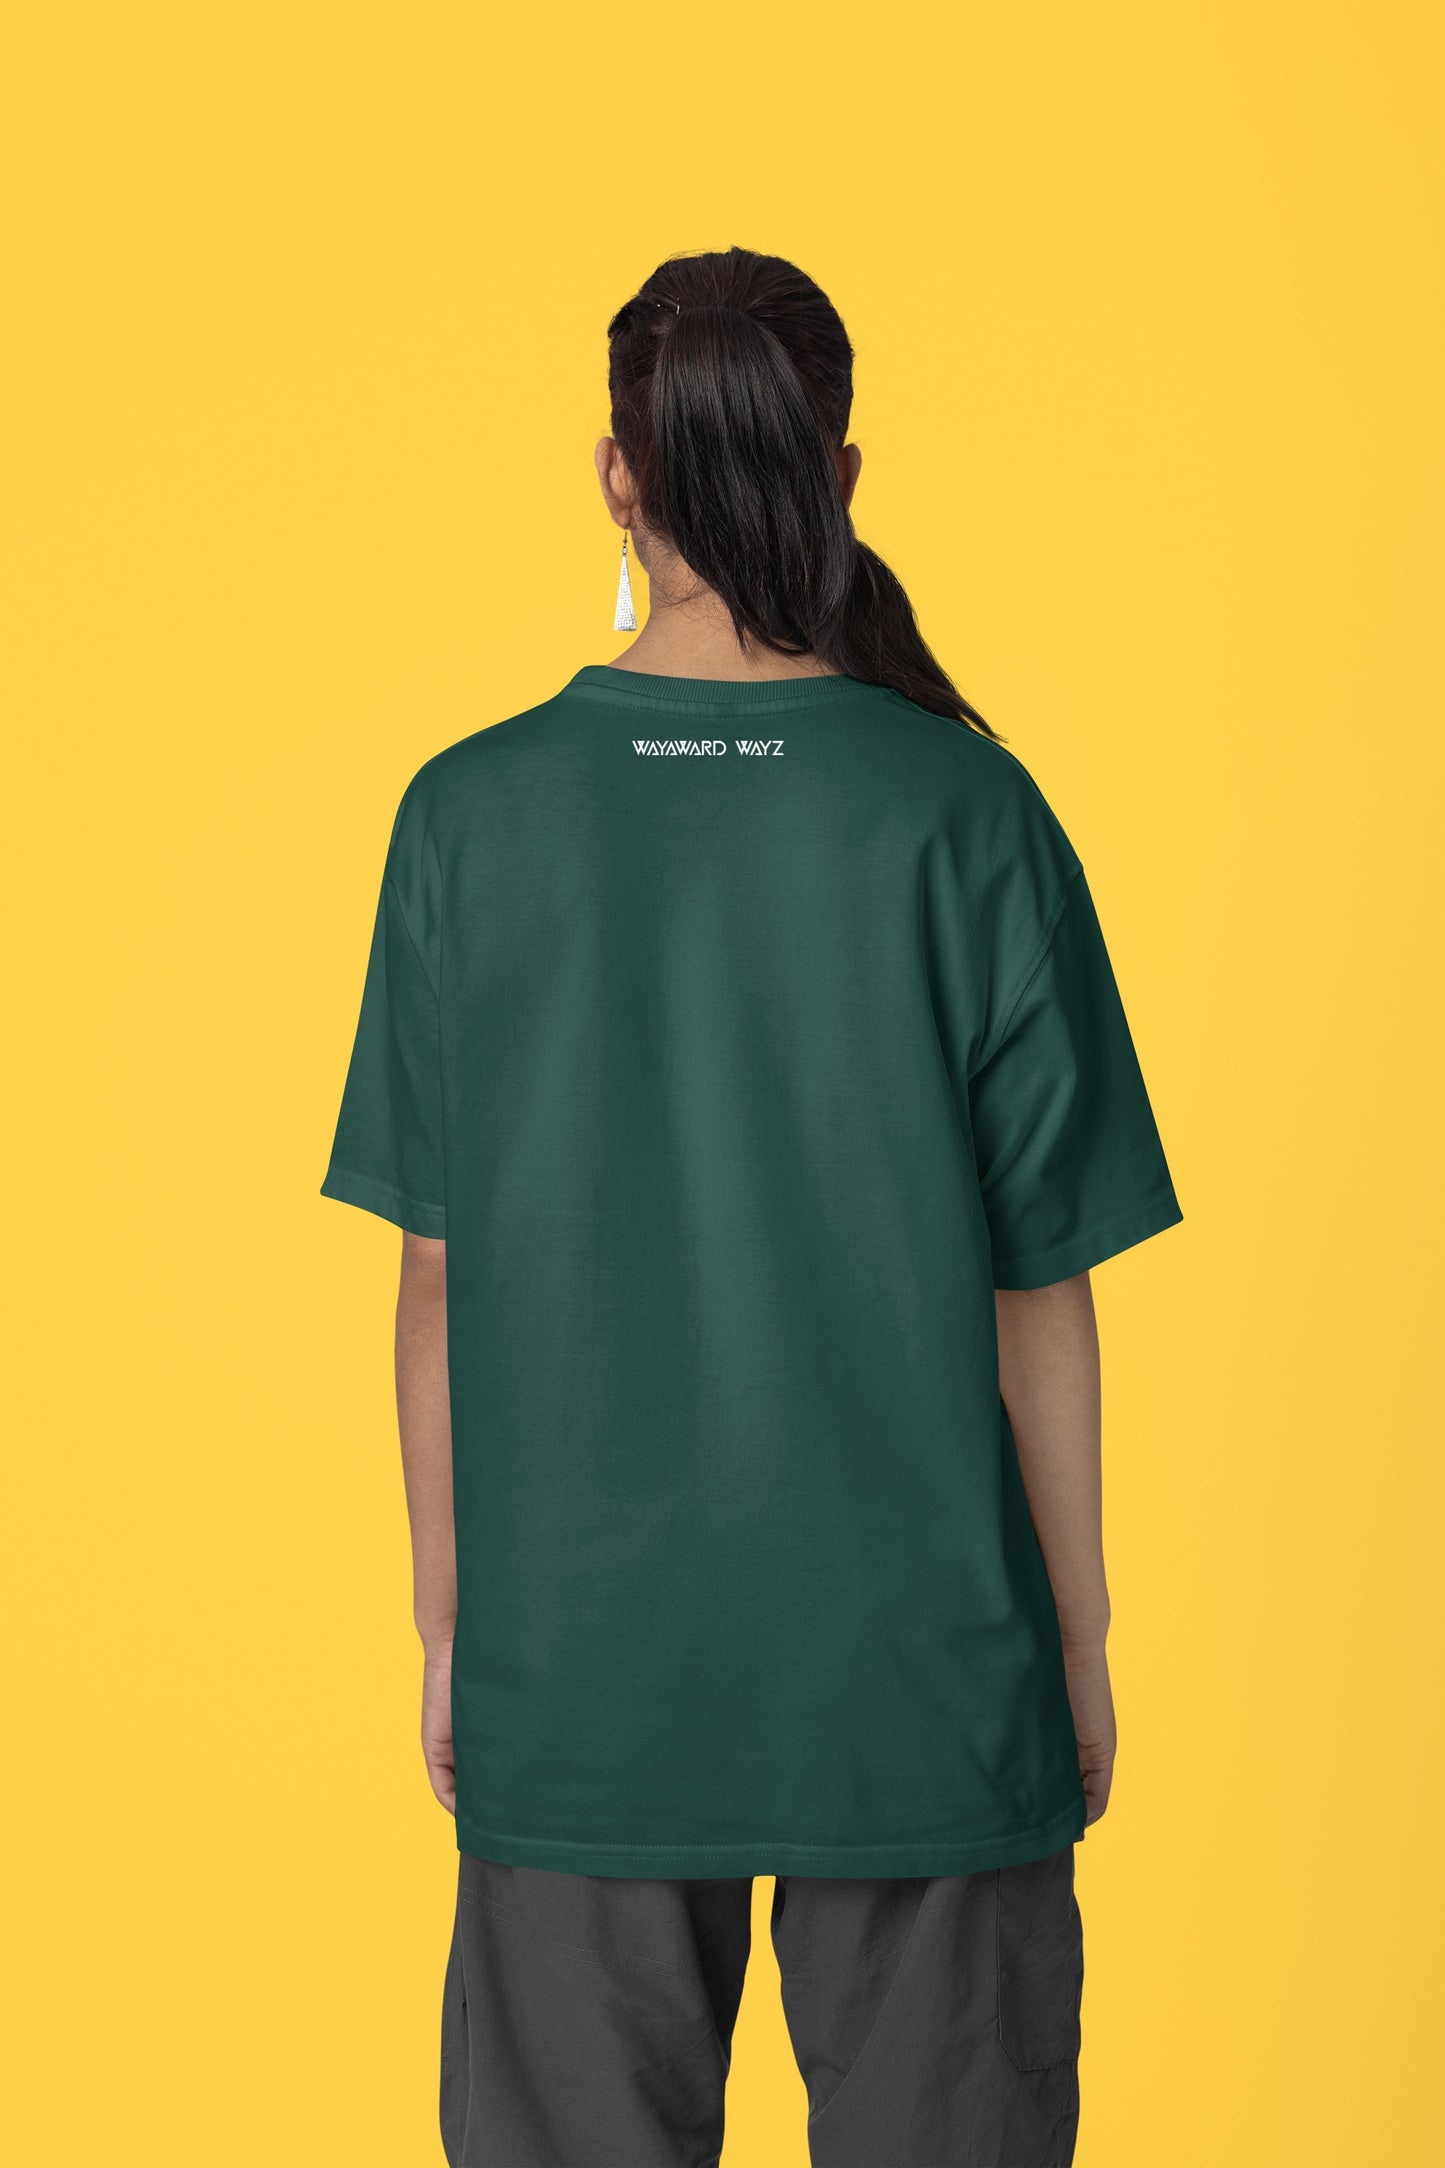 Bottle Green French Terry T-Shirt